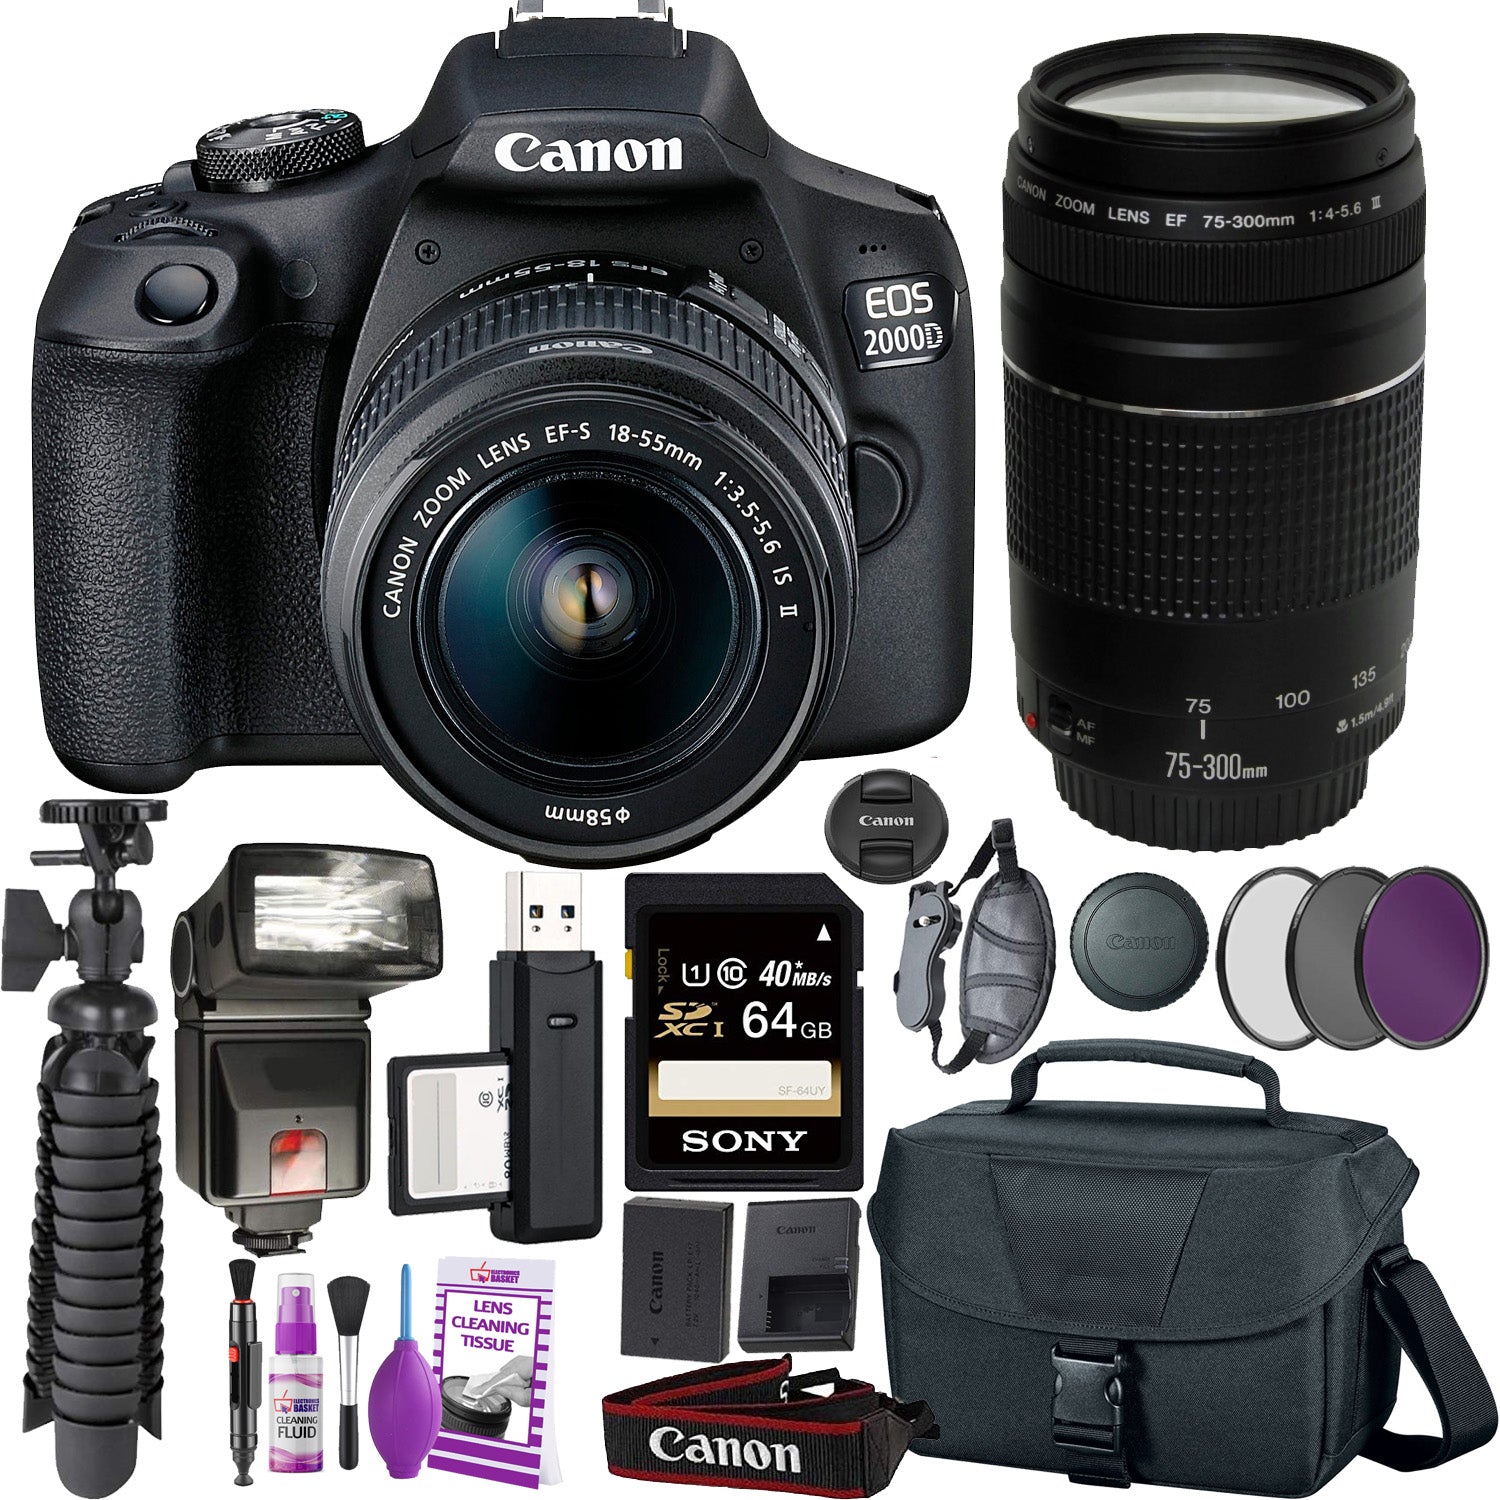 Canon EOS 2000D (Rebel t7) DSLR Camera and EF-S 18-55 mm f/3.5-5.6 IS II Lens + 75-300mm Telephoto Zoom Lens + 64GB Memory Card